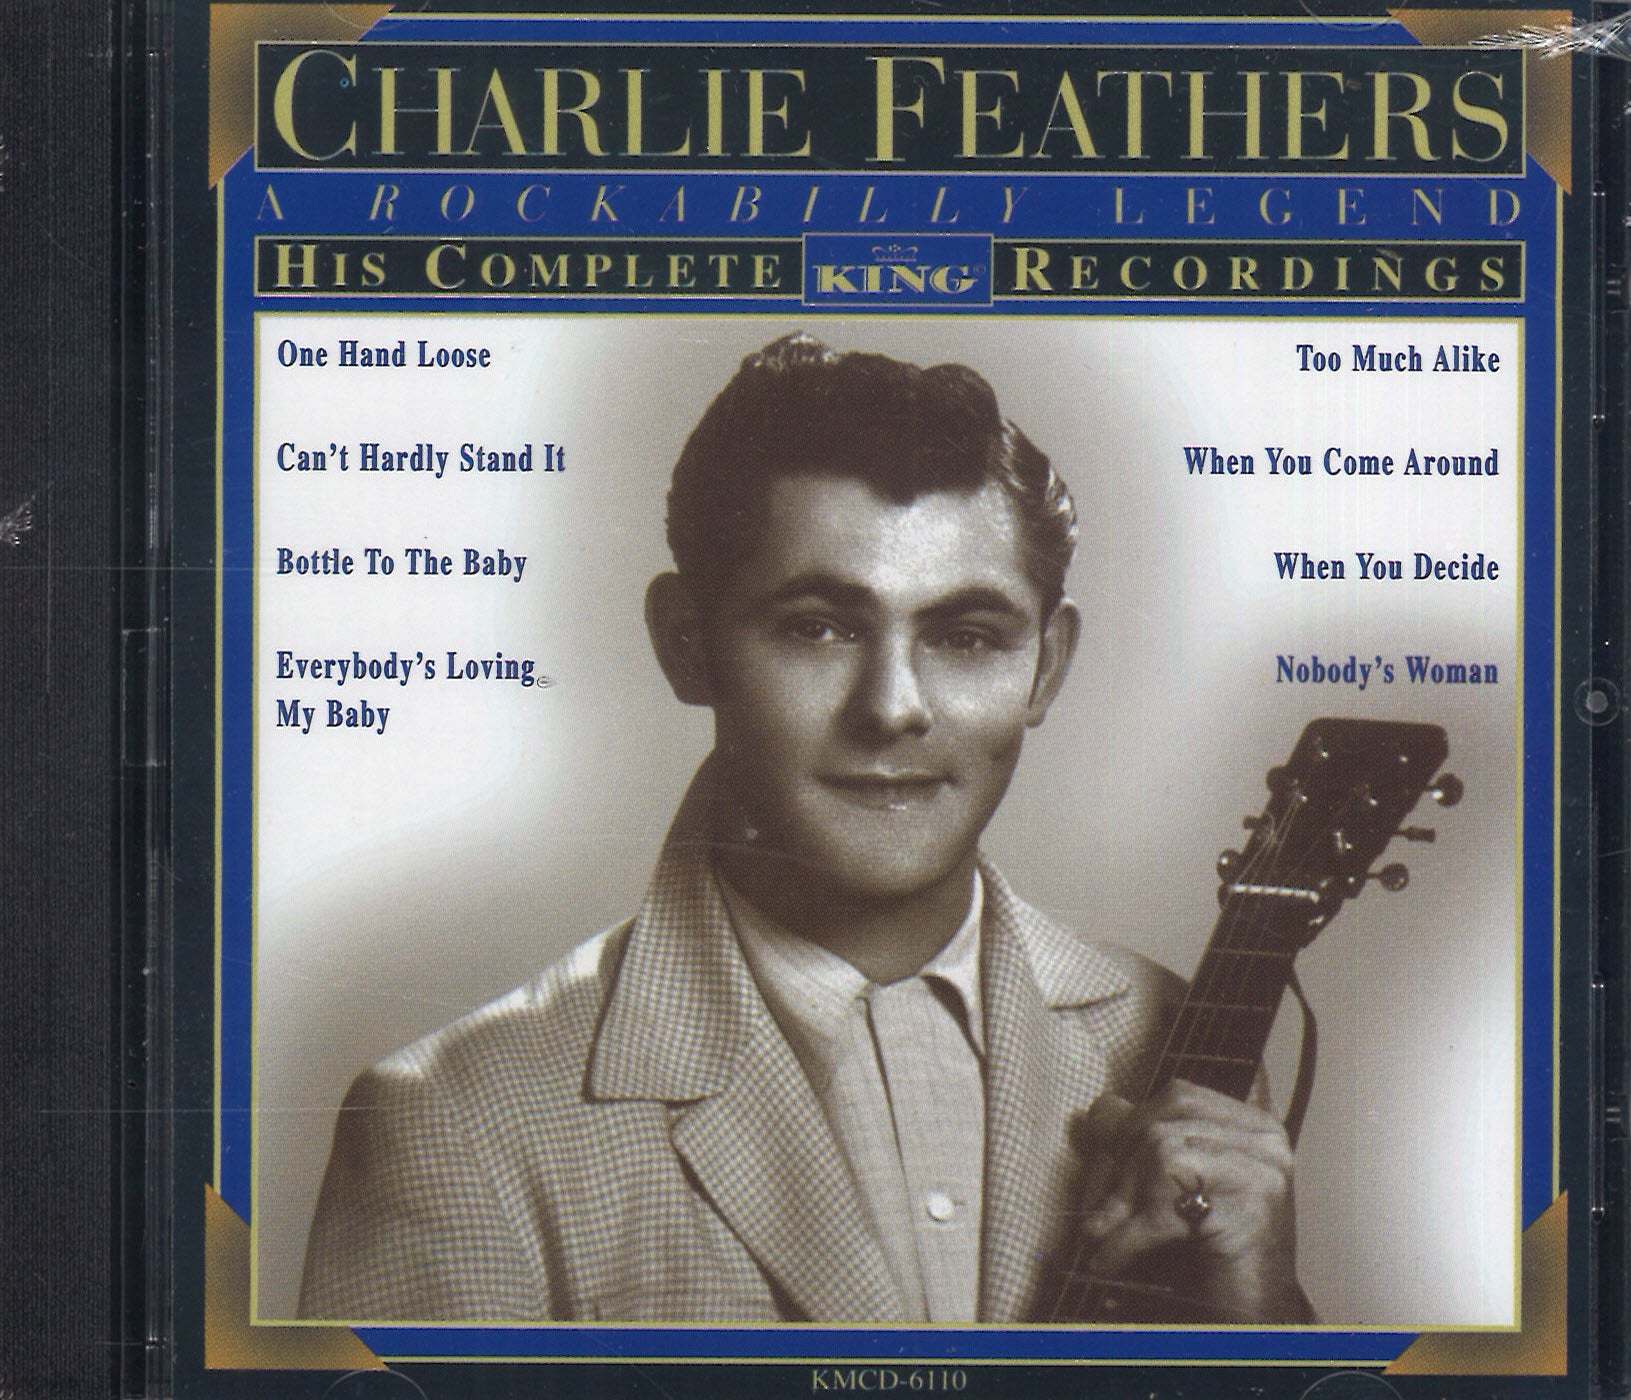 Charlie Feathers His Complete King Recordings